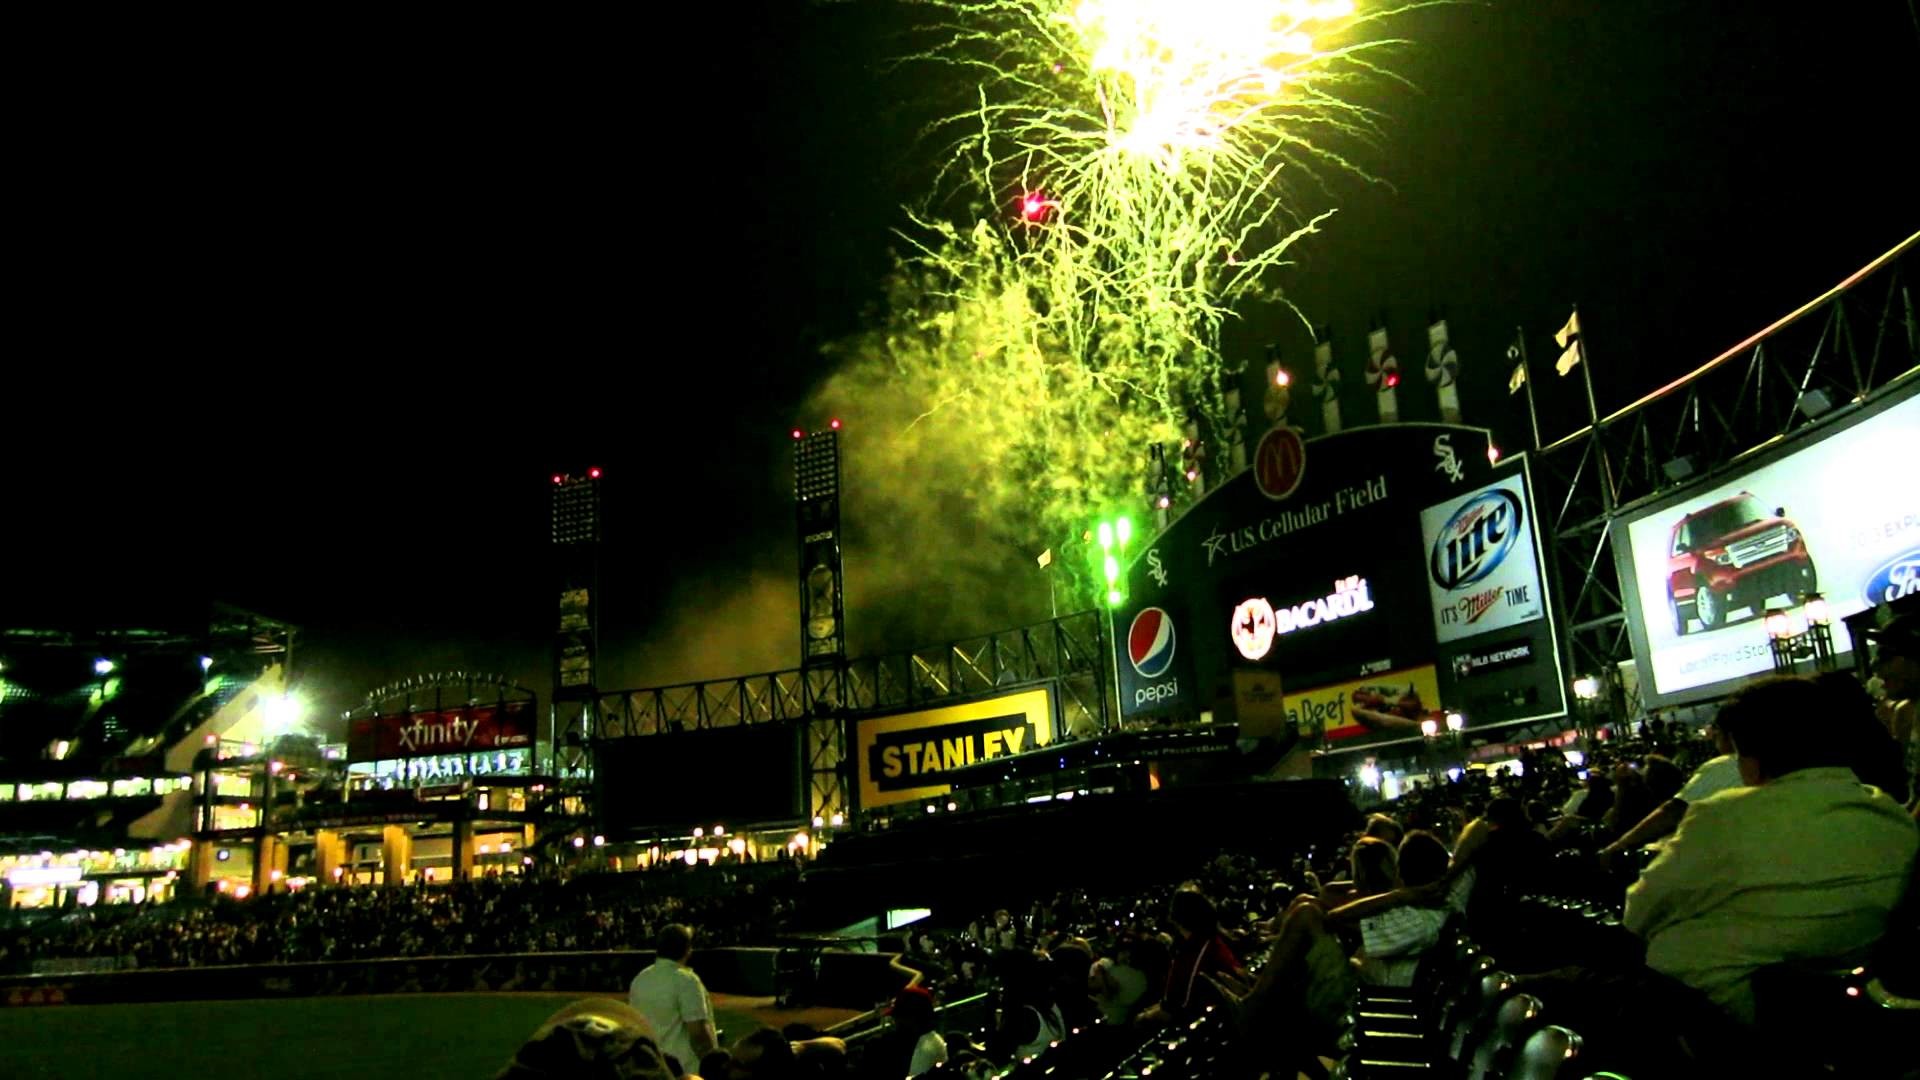 1920x1080 Chicago white sox baseball game fireworks on friday night. Video taken with  canon s100.